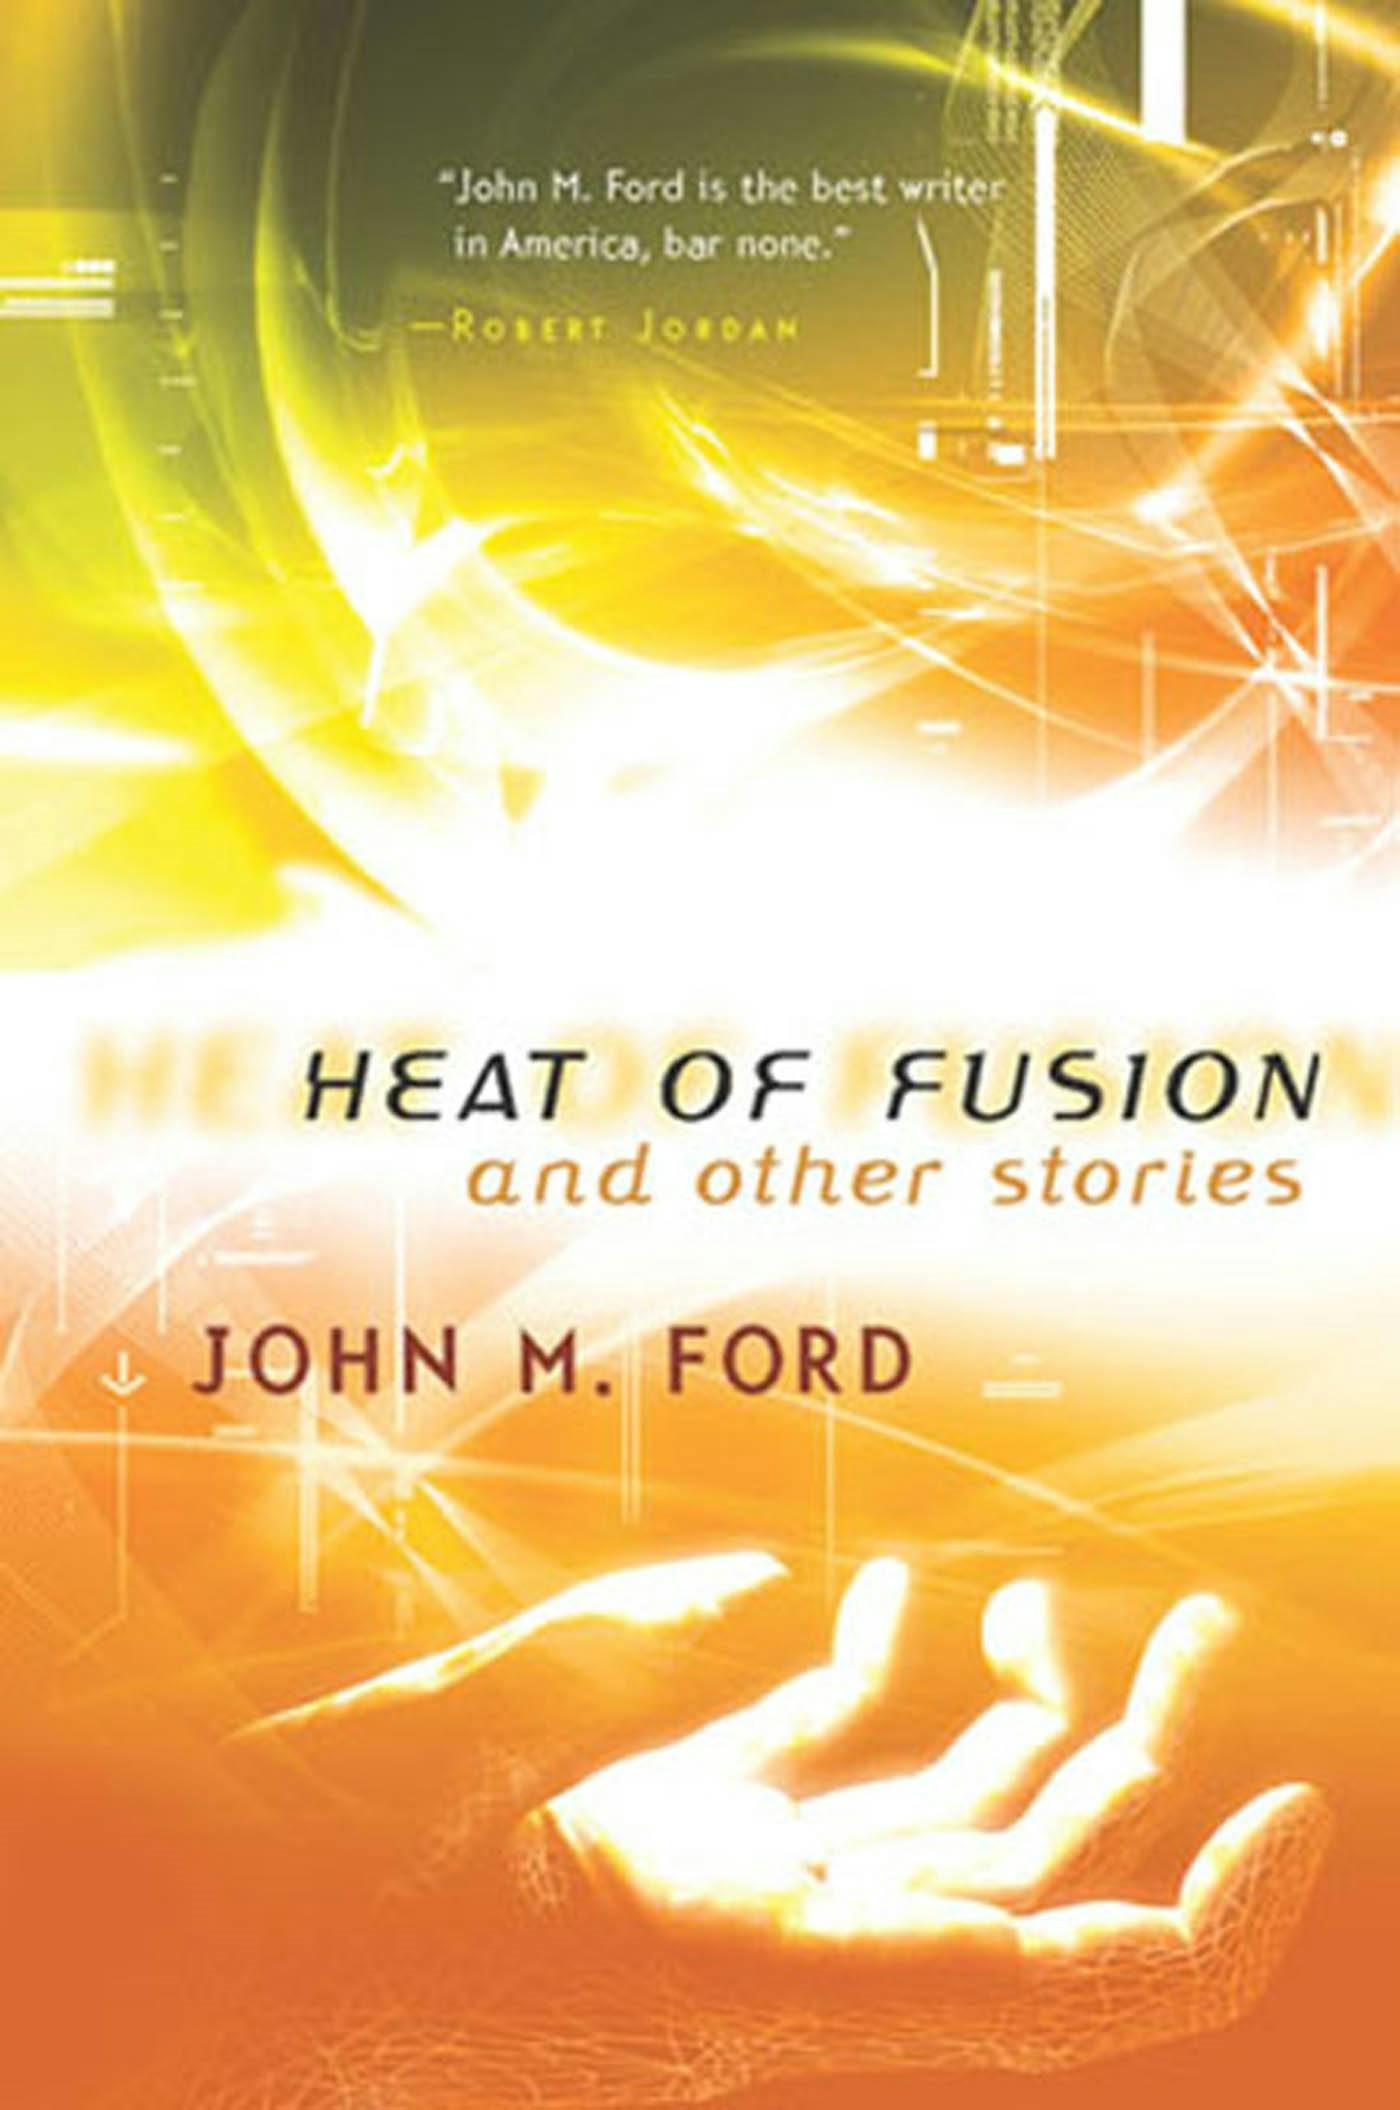 Cover for the book titled as: Heat of Fusion and Other Stories